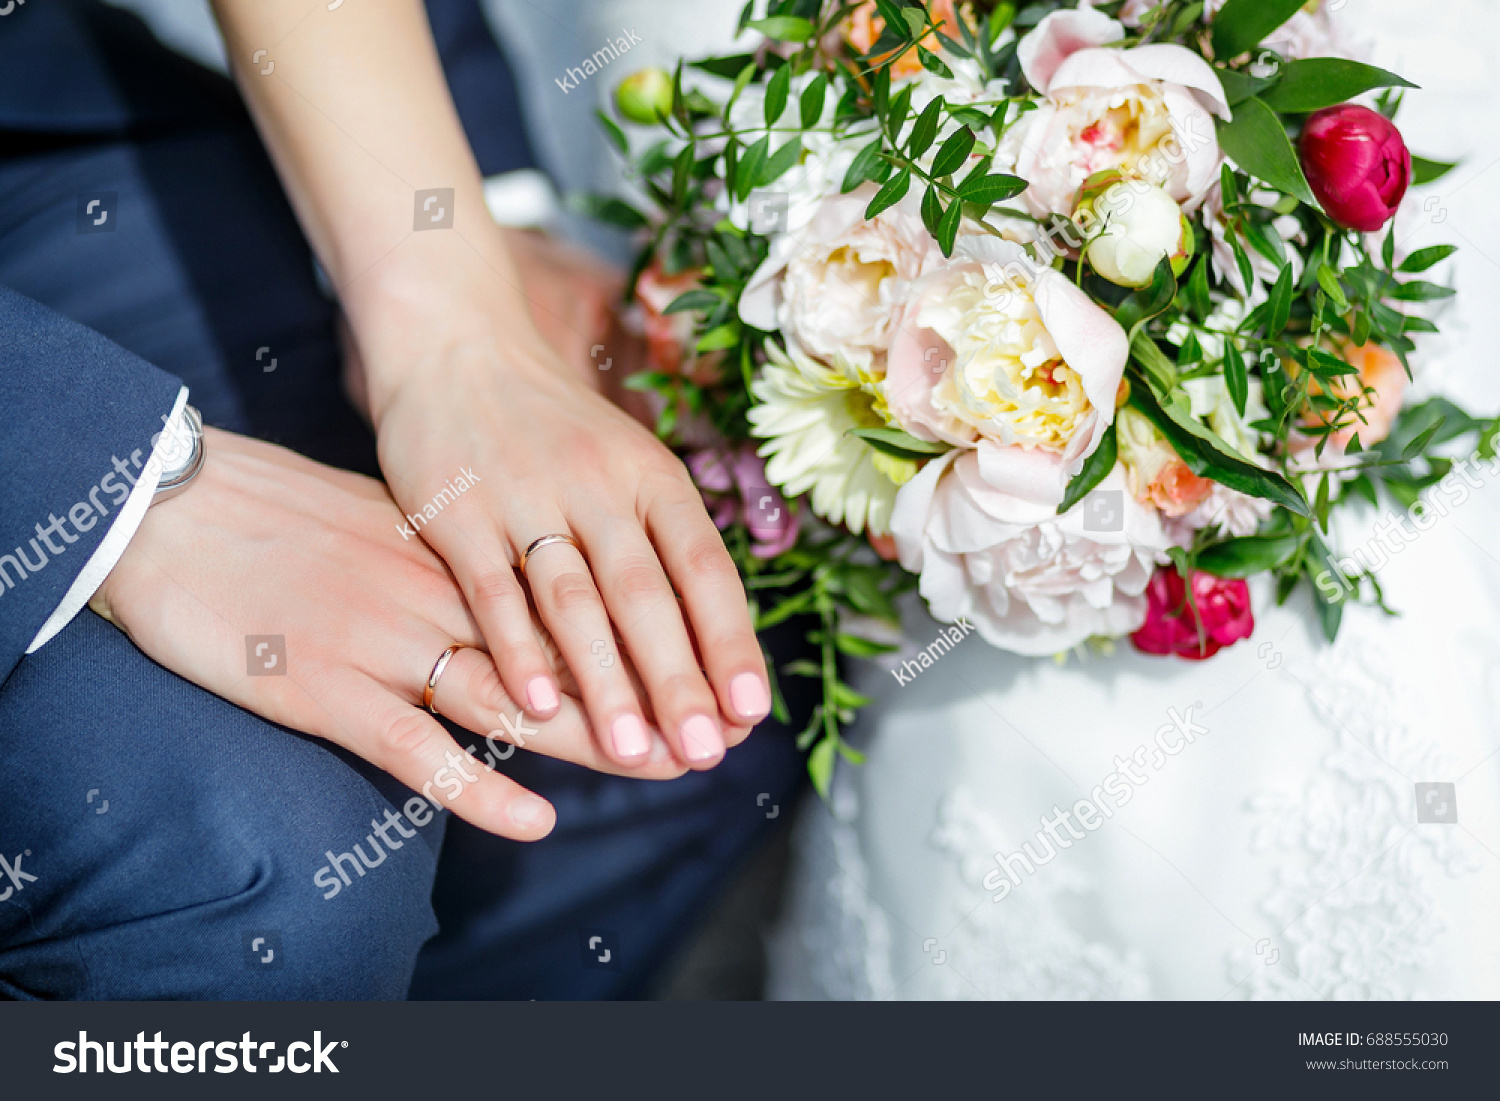 Wedding details. Hands of the newlyweds. Bride rings on hands. #688555030